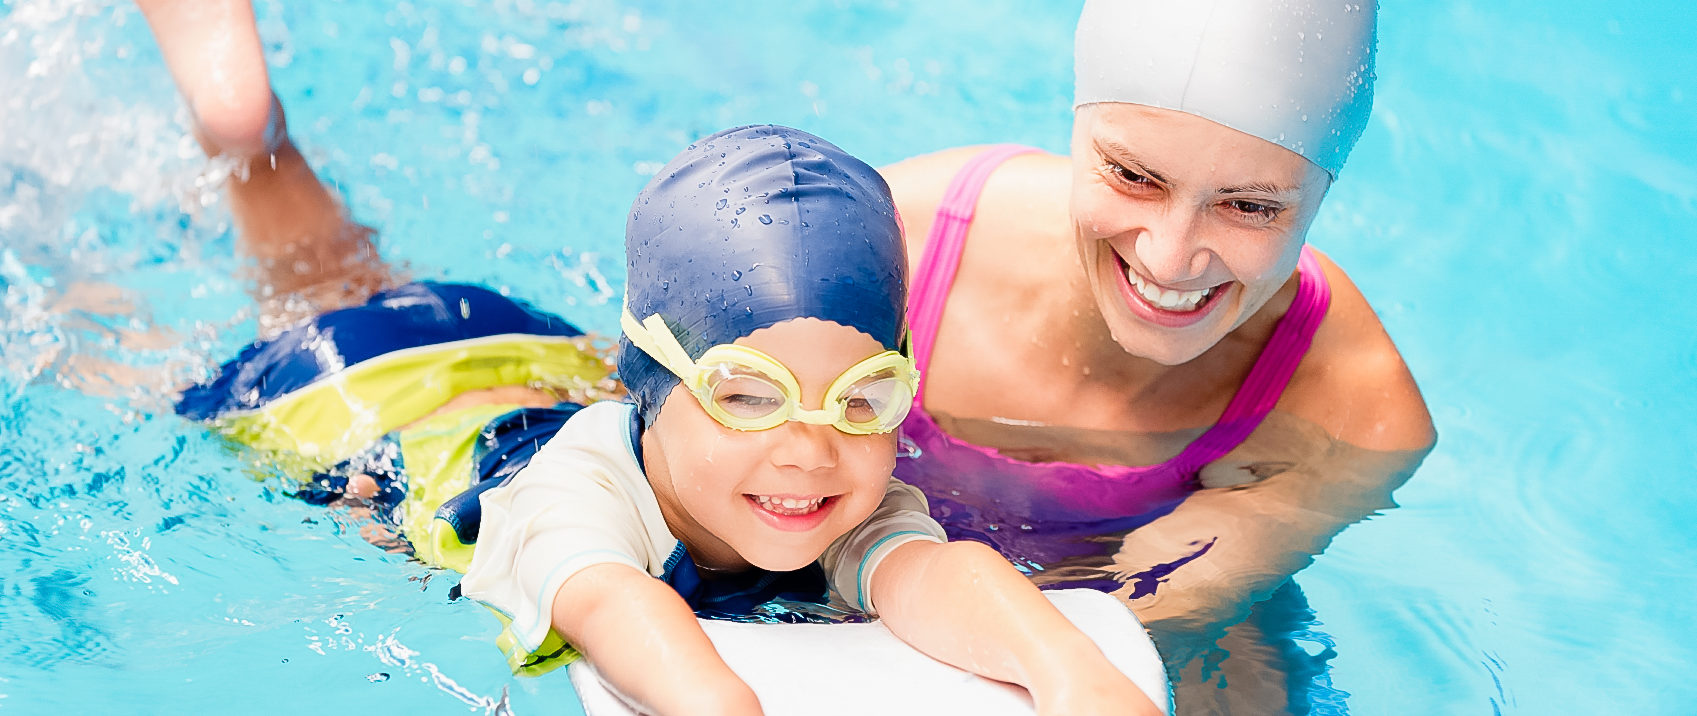 This picture shows a Calphin coach is happily teaching a little boy in swimming pool